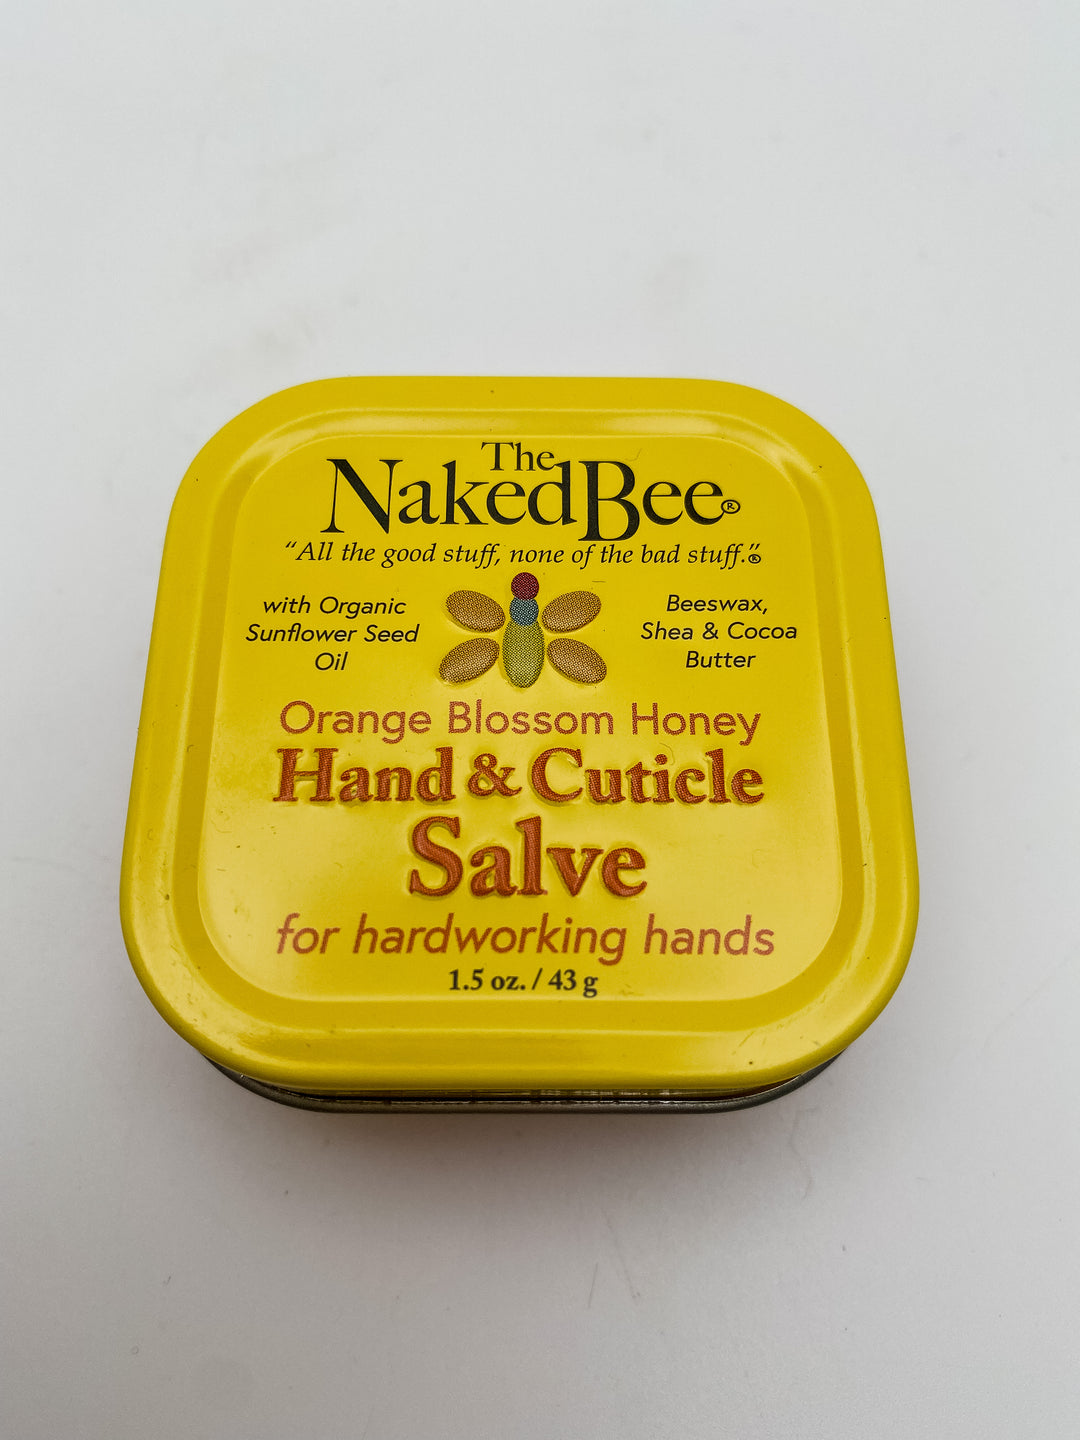 Orange Blossom Honey Hand & Cuticle Salve by The Naked Bee